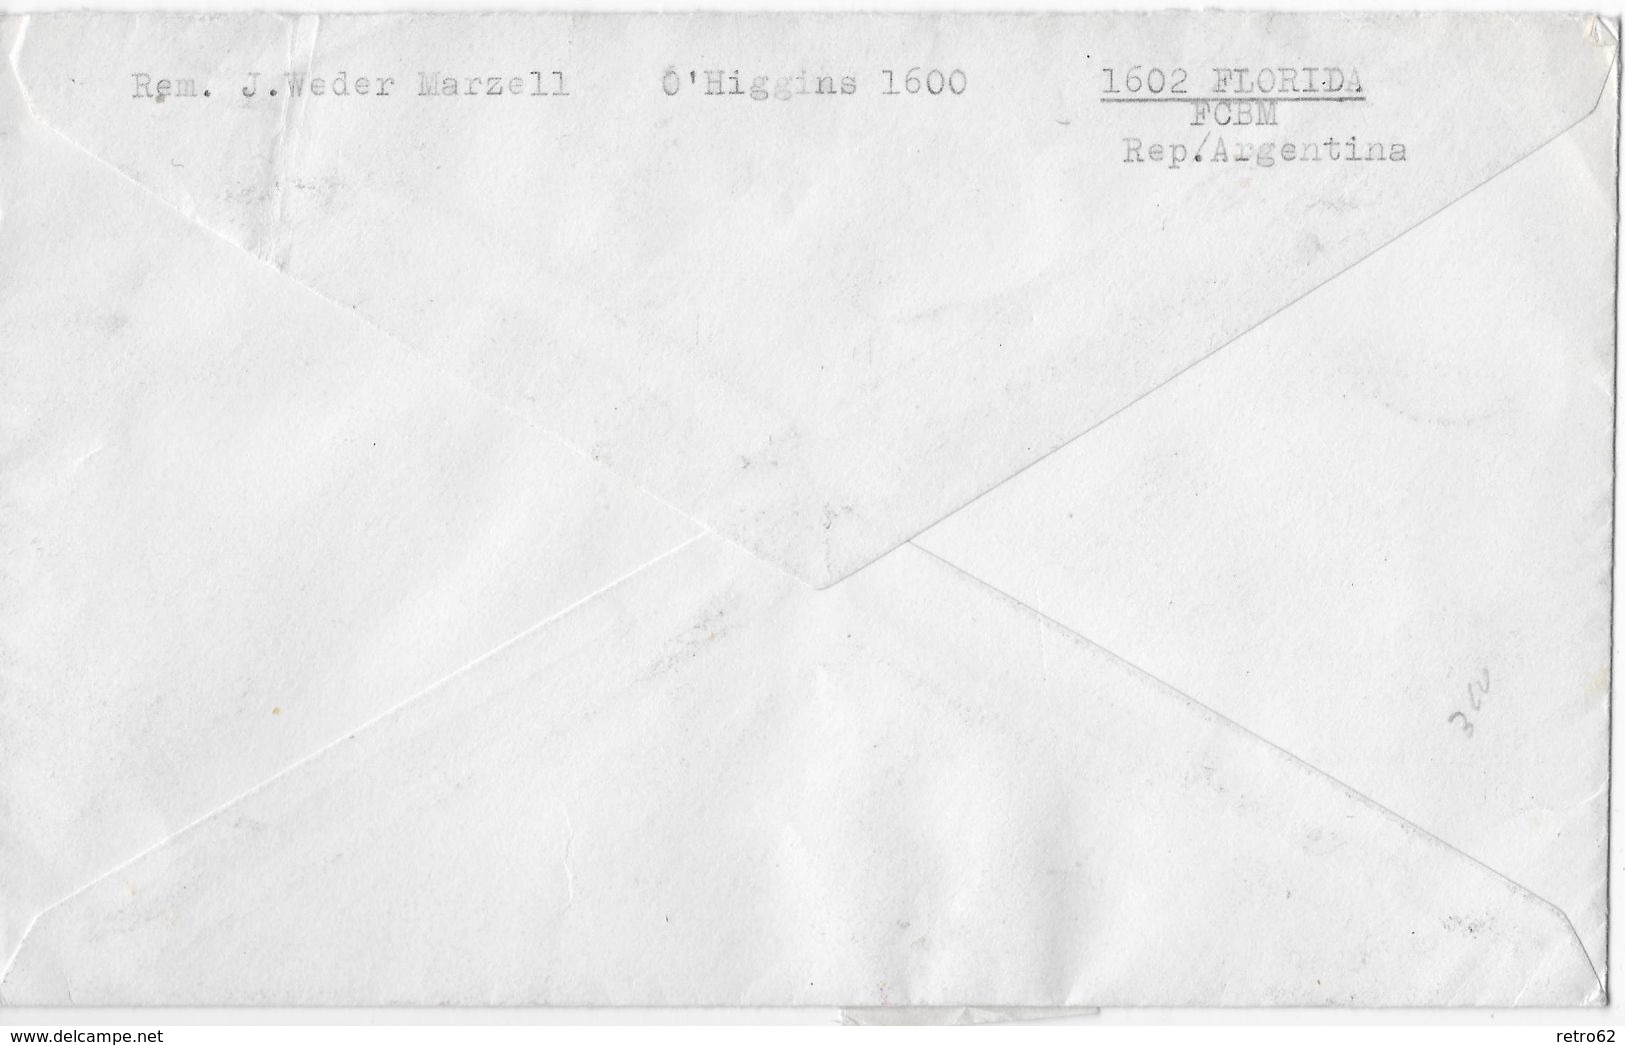 ARGENTINA 1979 - R-Letter Via Aerea From SUIZA - Lettres & Documents